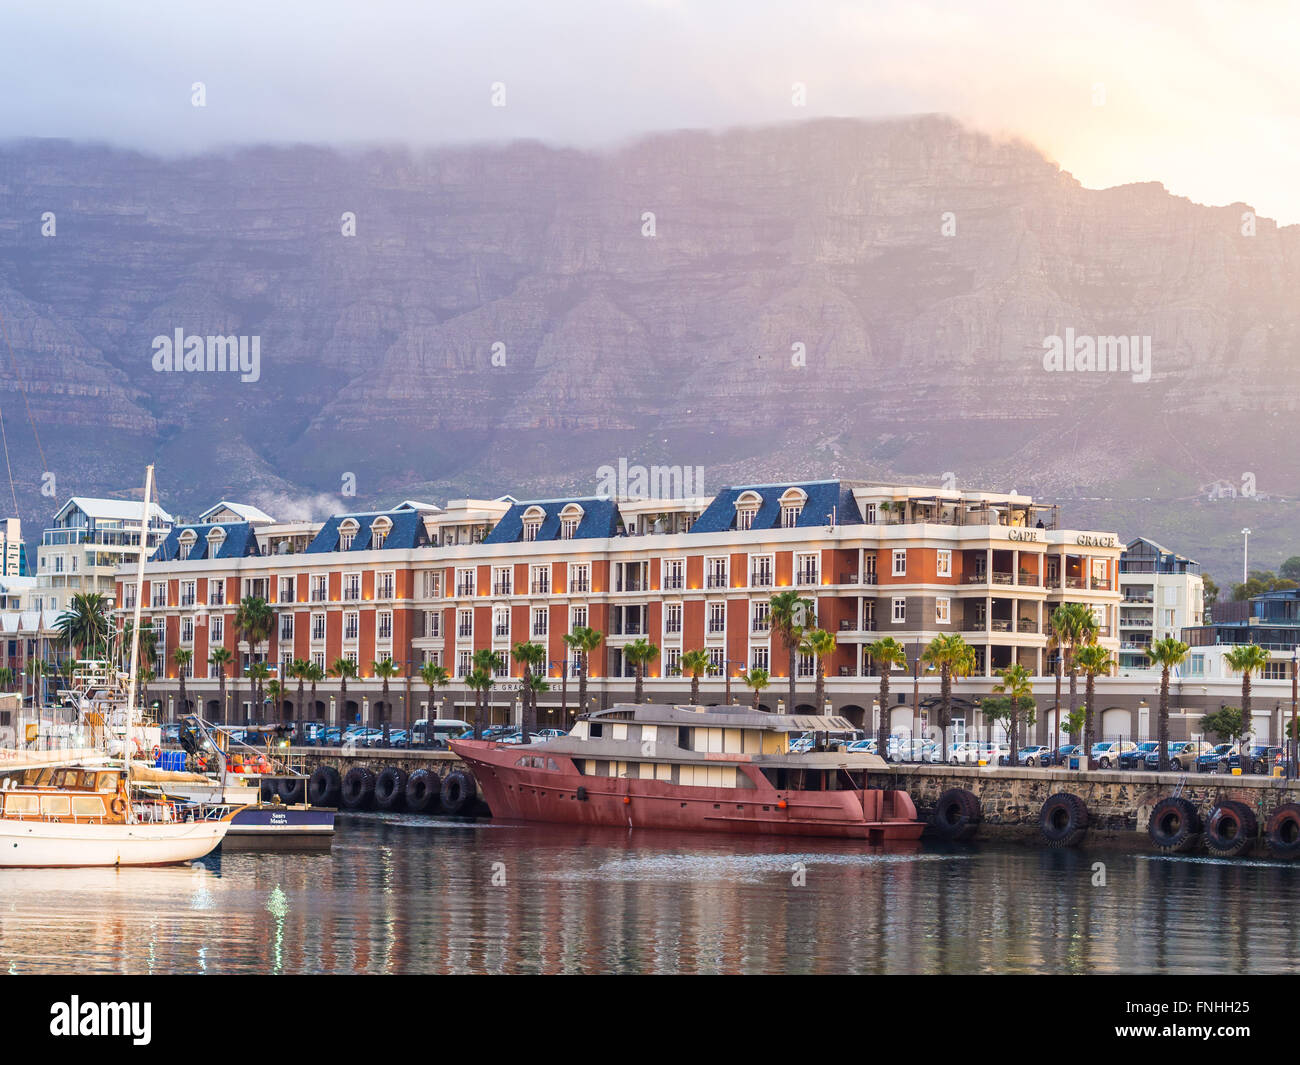 Waterfront in Cape Town, South Africa, overlooked by Table Mountain at sunset. Stock Photo